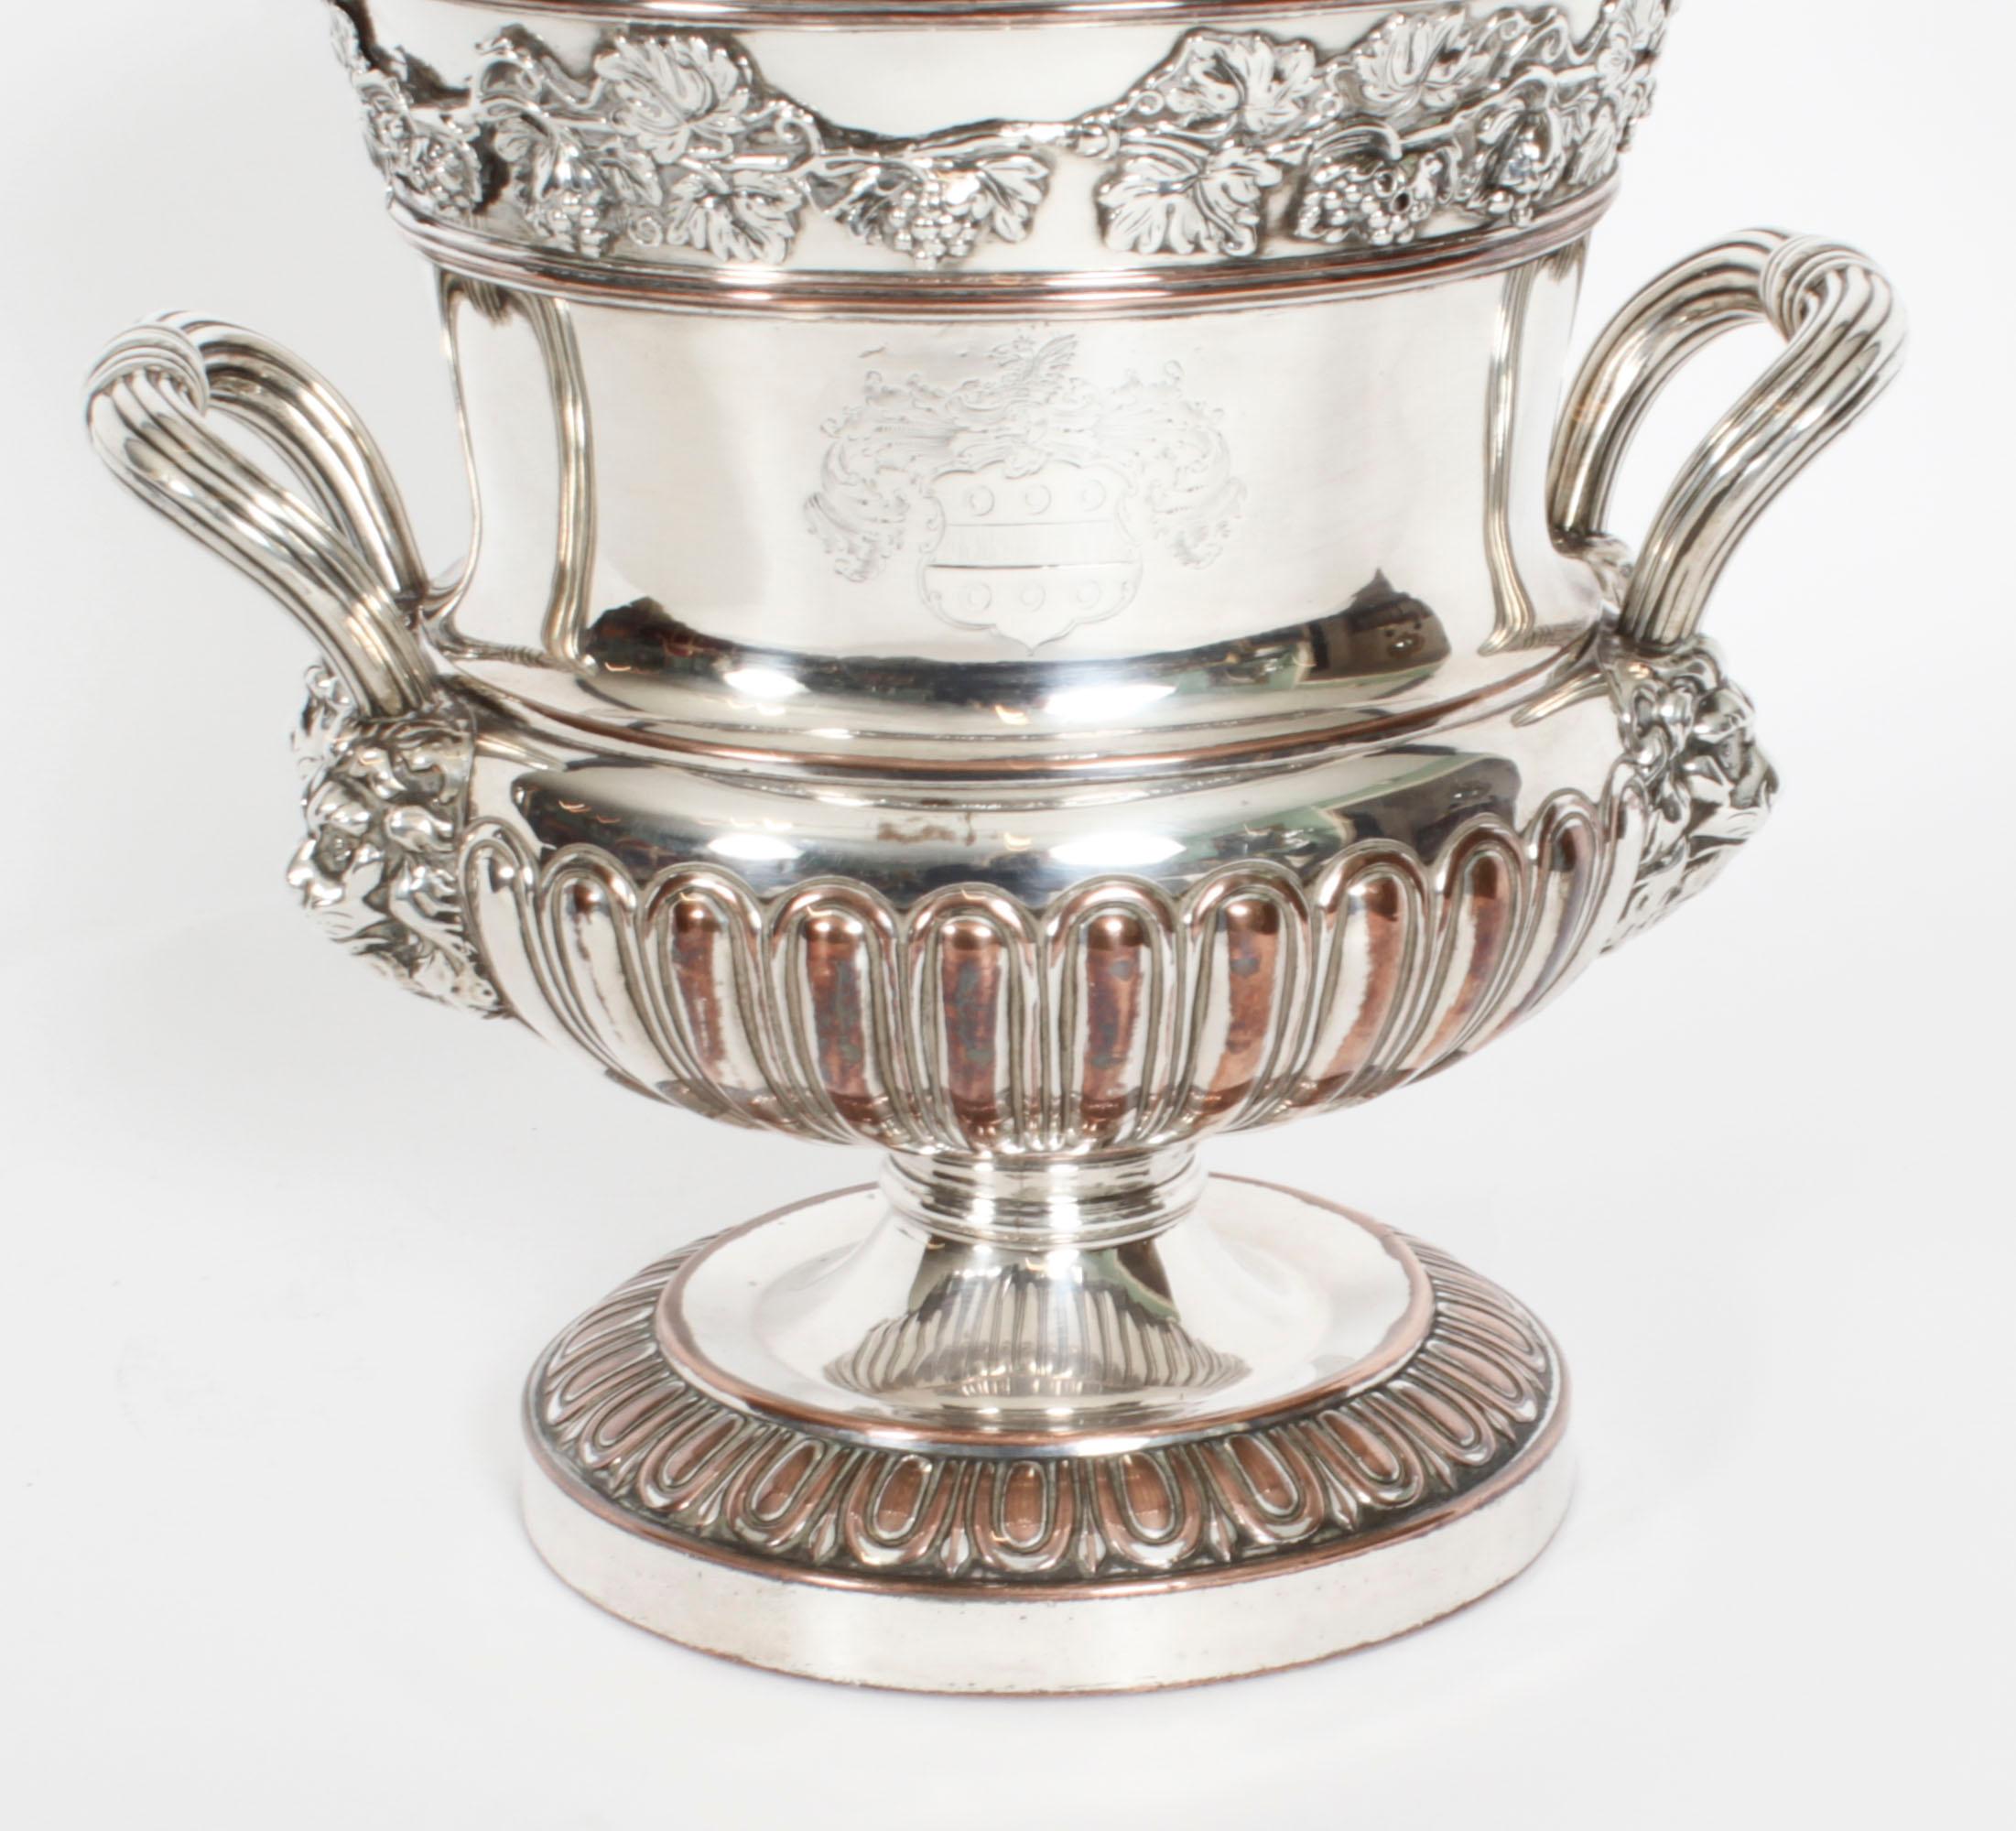 This is a wonderful and rare antique English Old Sheffield Plate, silver on copper, Regency wine cooler of campana form, circa 1820 in date.
 
The cooler features a ribbed two-handled maskhead urn shaped body with fluted band and pedestal foot